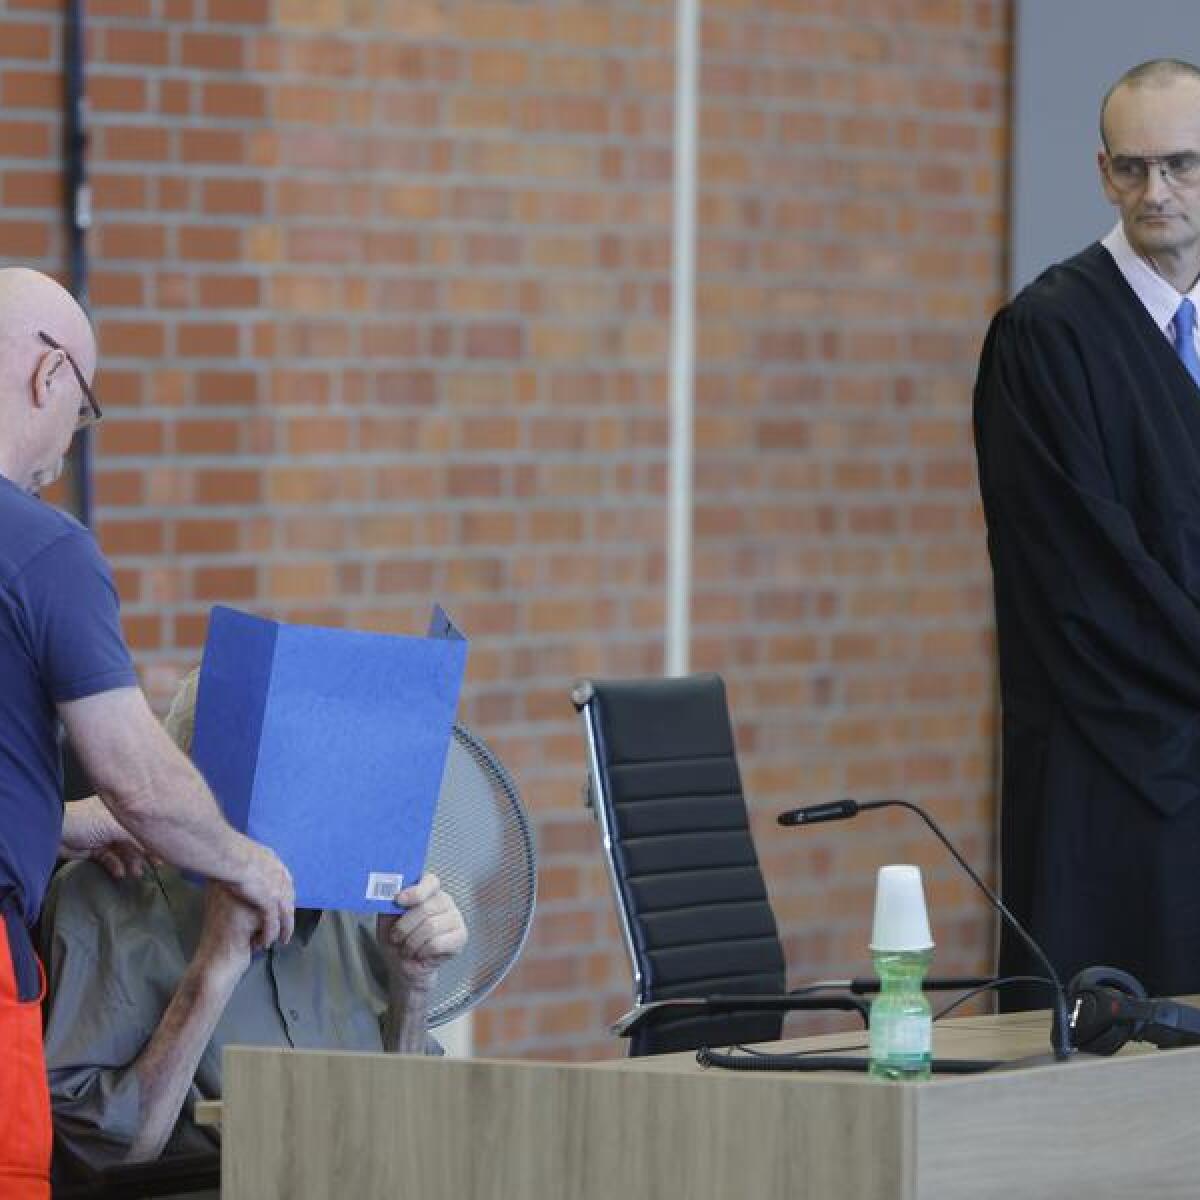 A German man has been jailed for aiding the murder of camp inmates.